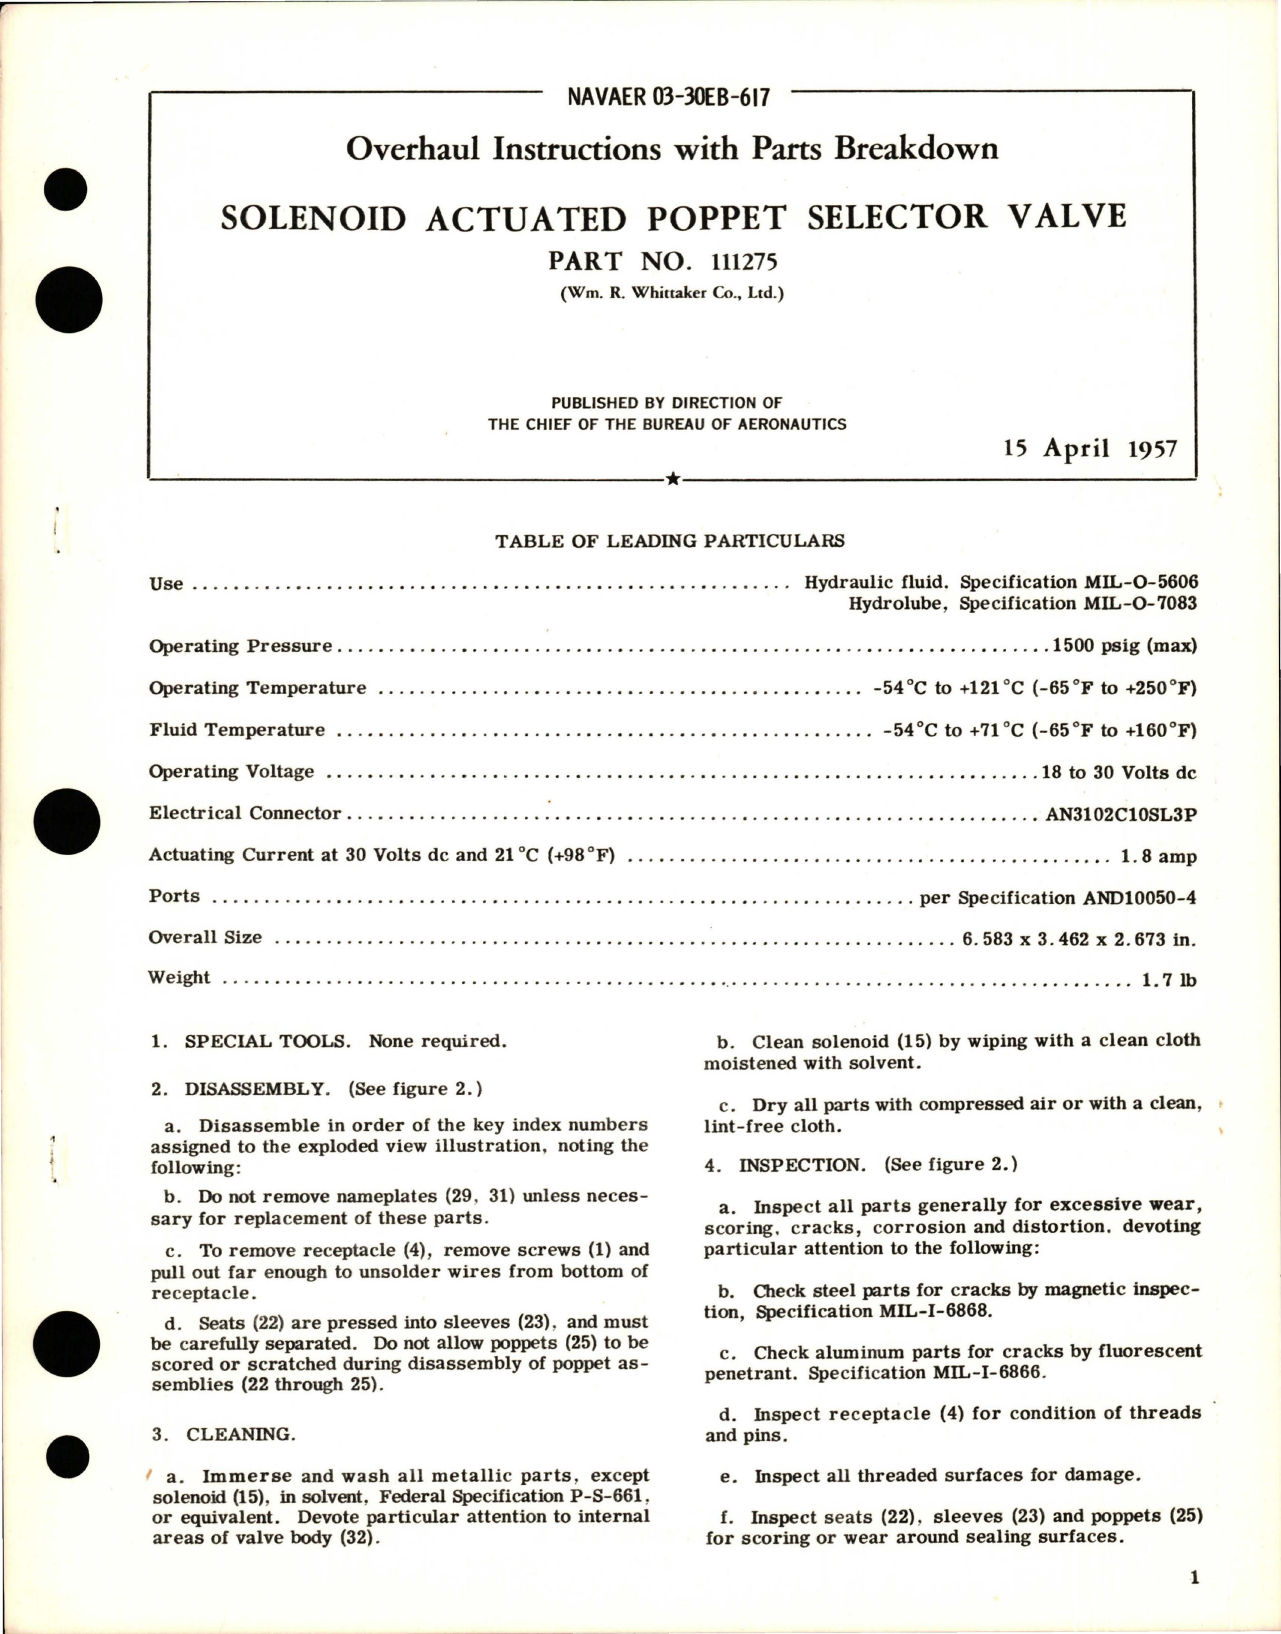 Sample page 1 from AirCorps Library document: Overhaul Instructions with Parts for Solenoid Actuated Poppet Selector Valve - Part 111275